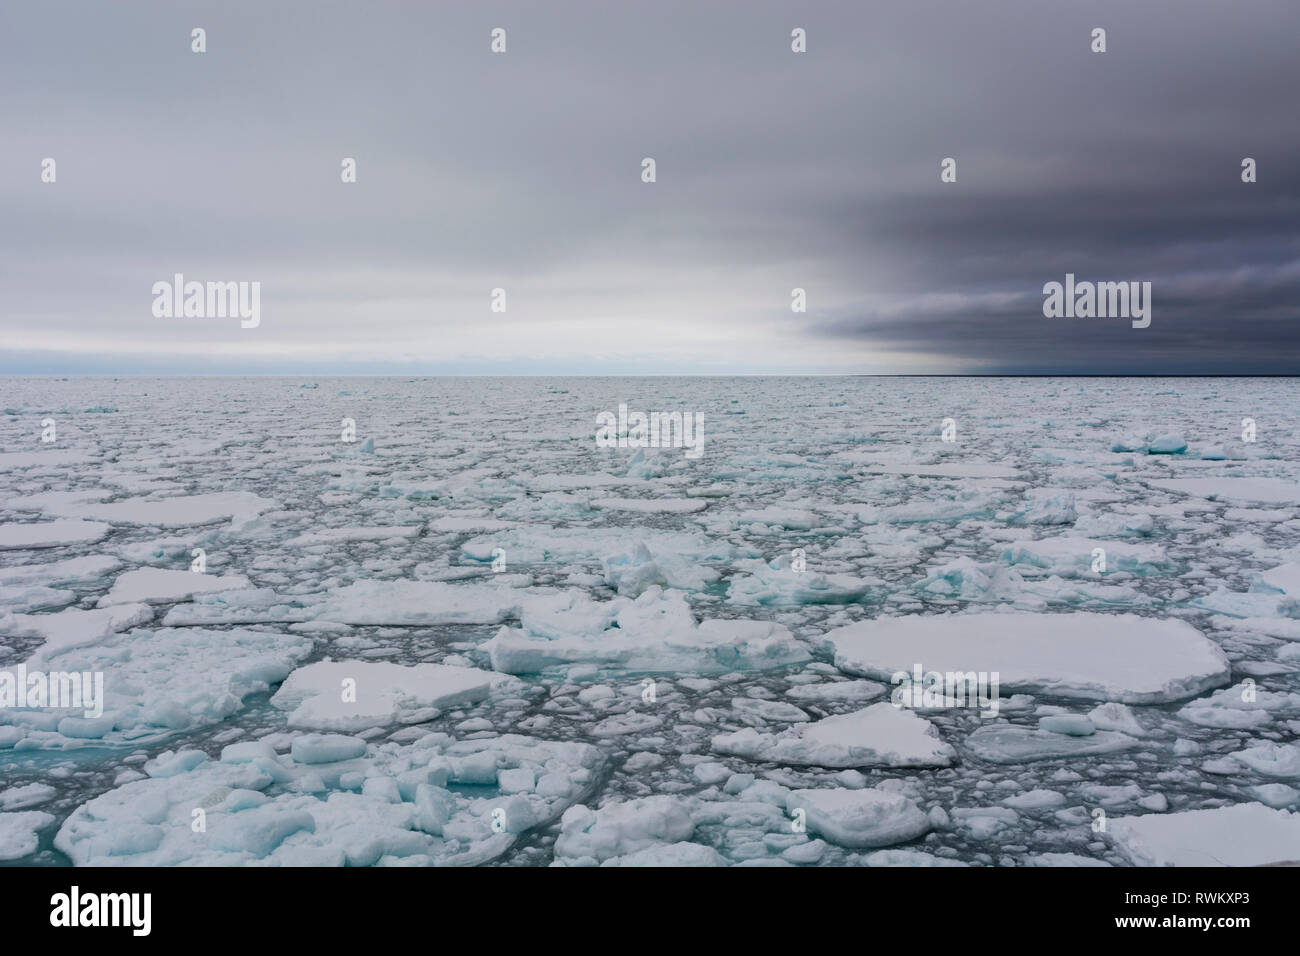 Floating pieces of pack ice, Polar Ice Cap, 81north of Spitsbergen, Norway Stock Photo